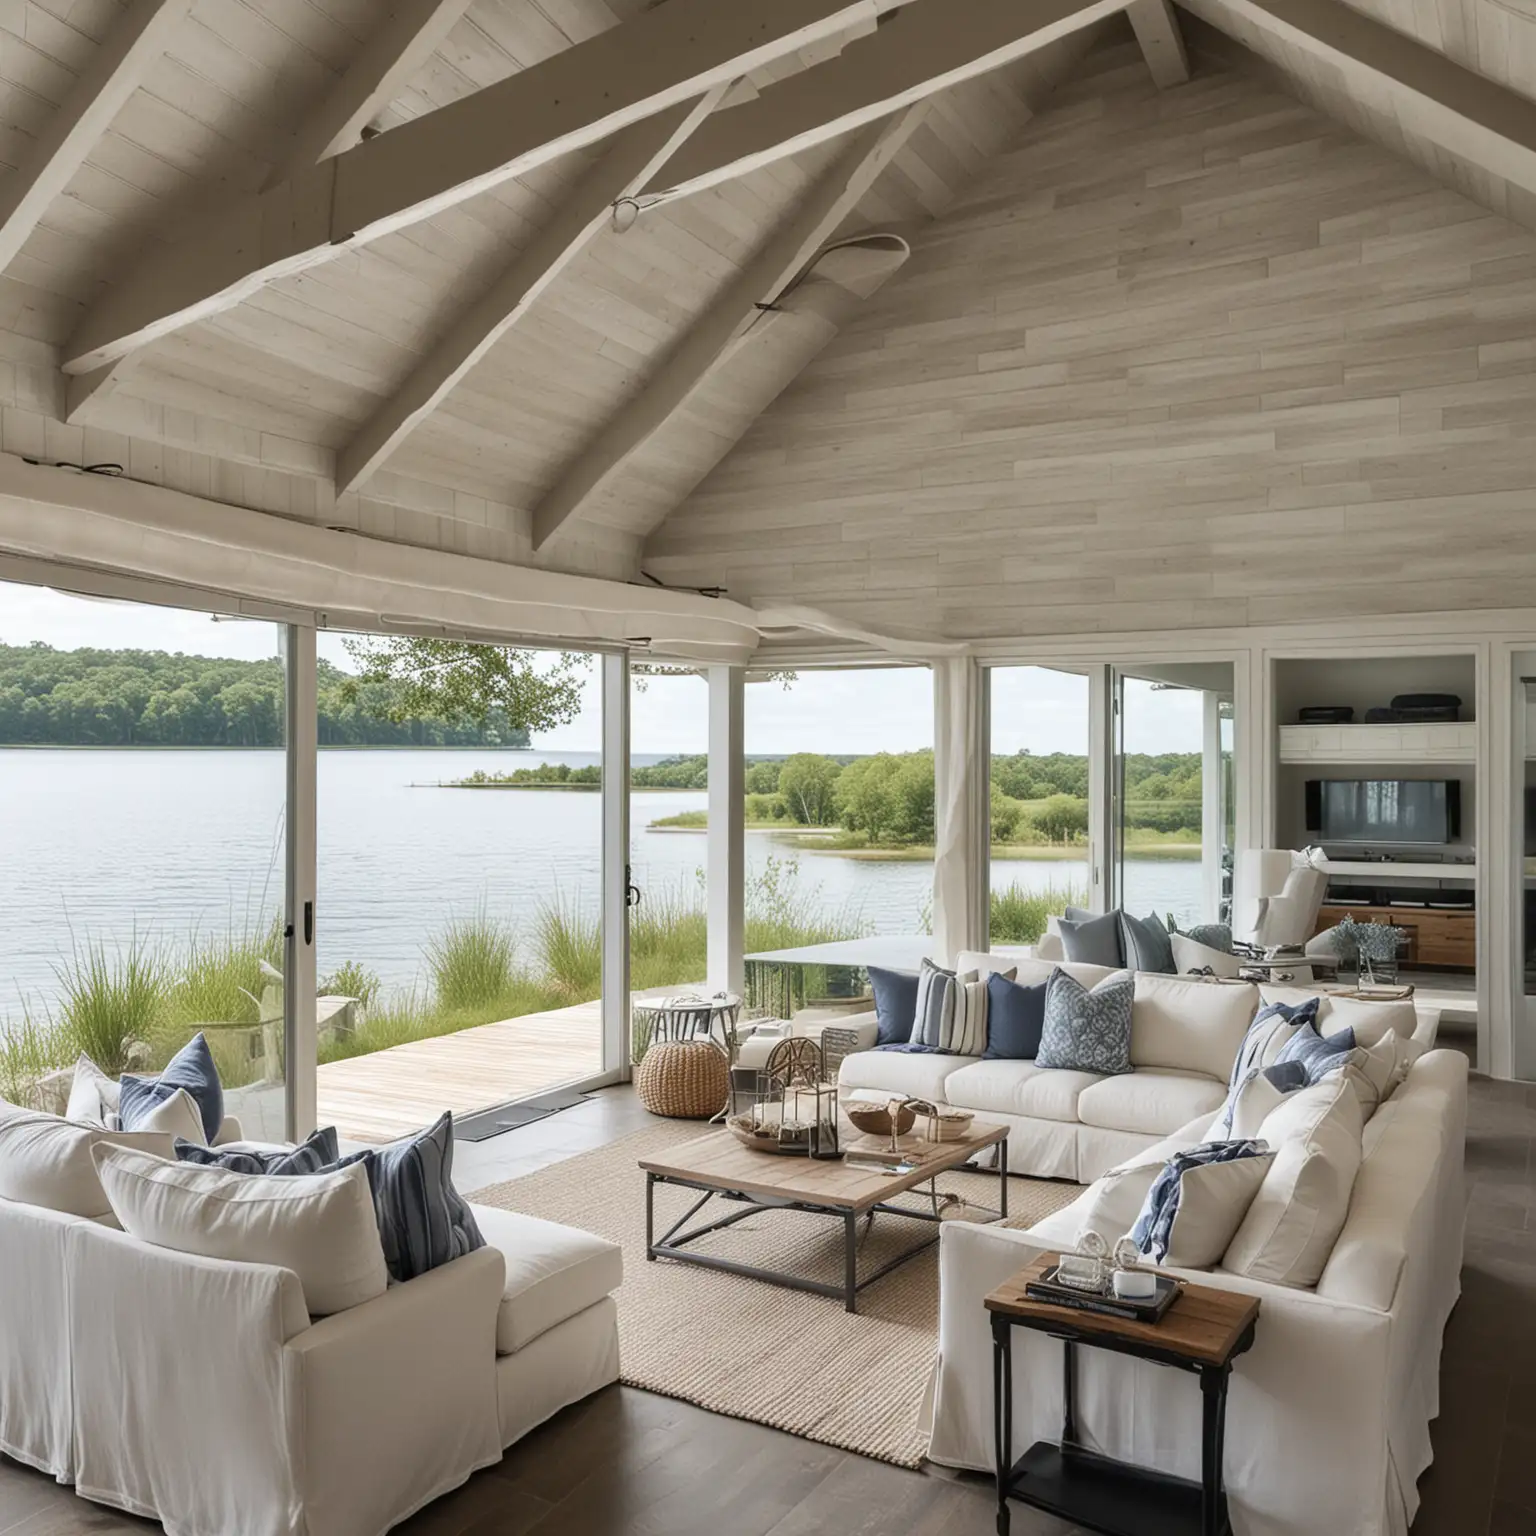 Modern, new boat house on the lake with slipcovered furniture and coastal decor